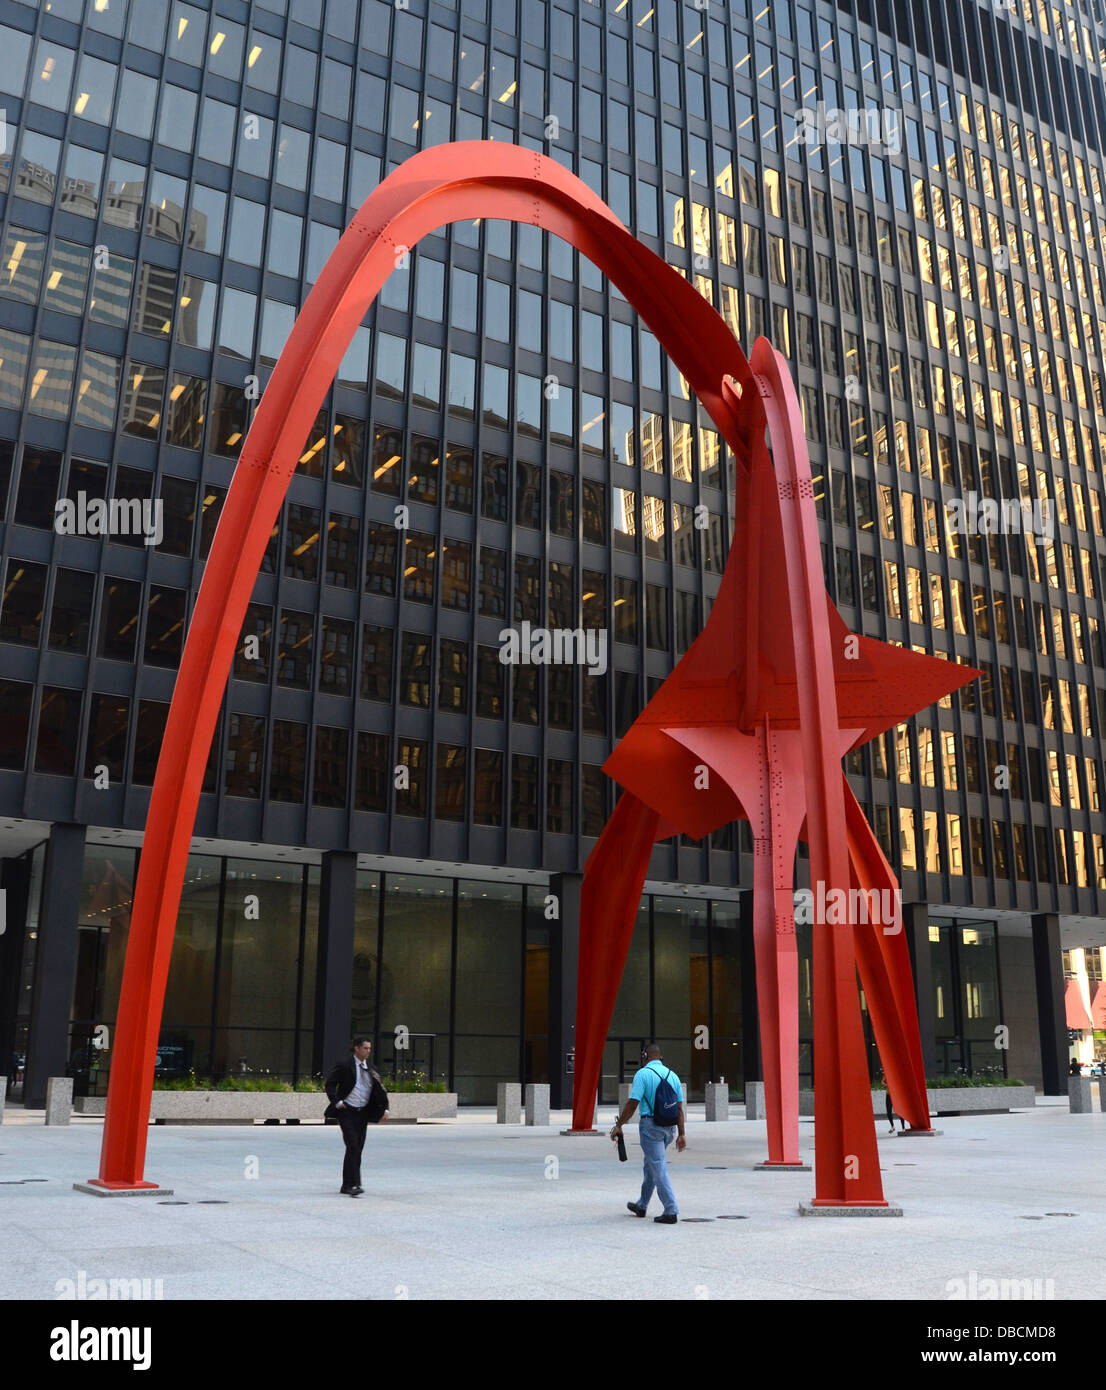 CHICAGO - JULY 19: Flamingo, in the Federal Plaza in Chicago, is shown here on July 19, 2013. Stock Photo